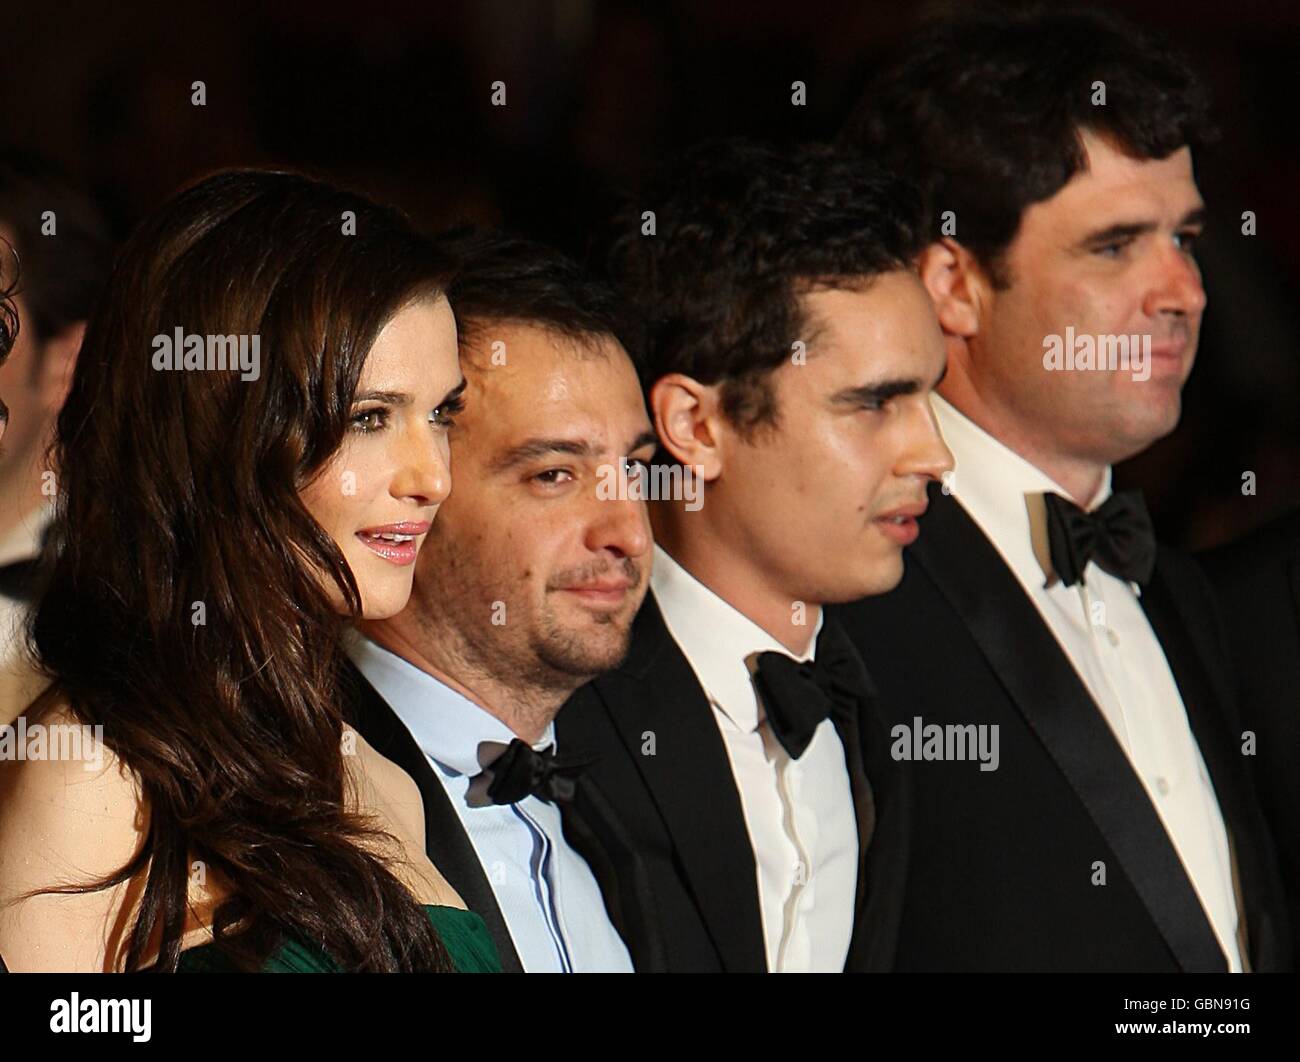 Rachel Weisz, Alejandro Amenabar and Max Minghella (left to right) arriving for the official screening of Agora at the Palais de Festival during the 62nd Cannes Film Festival, France. Stock Photo